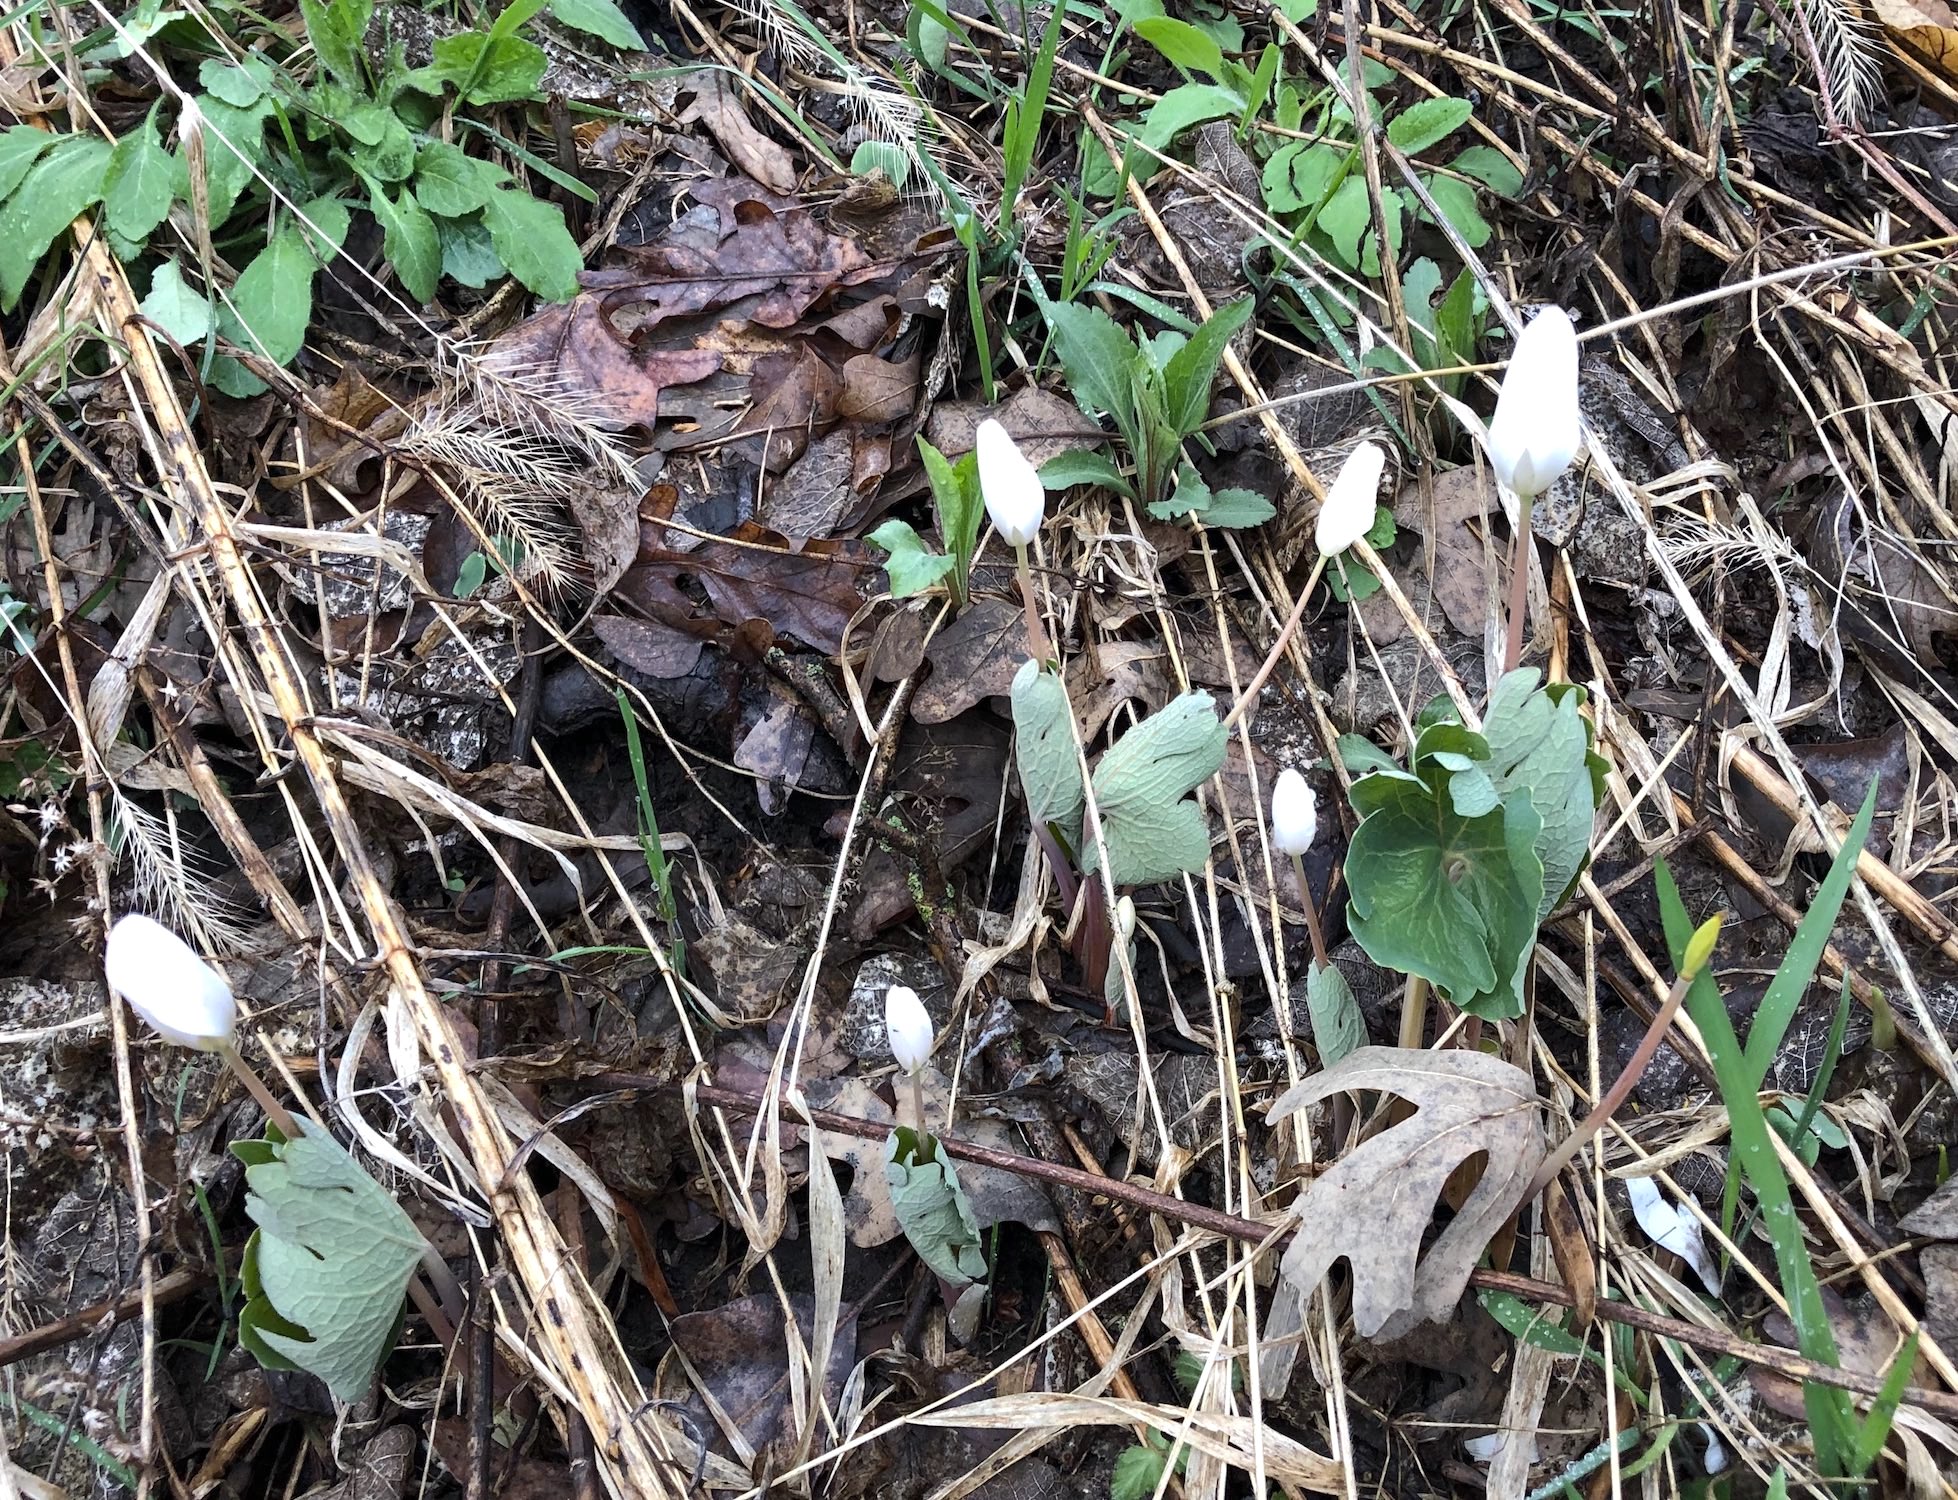 Bloodroot near Council Ring on April 12, 2019.